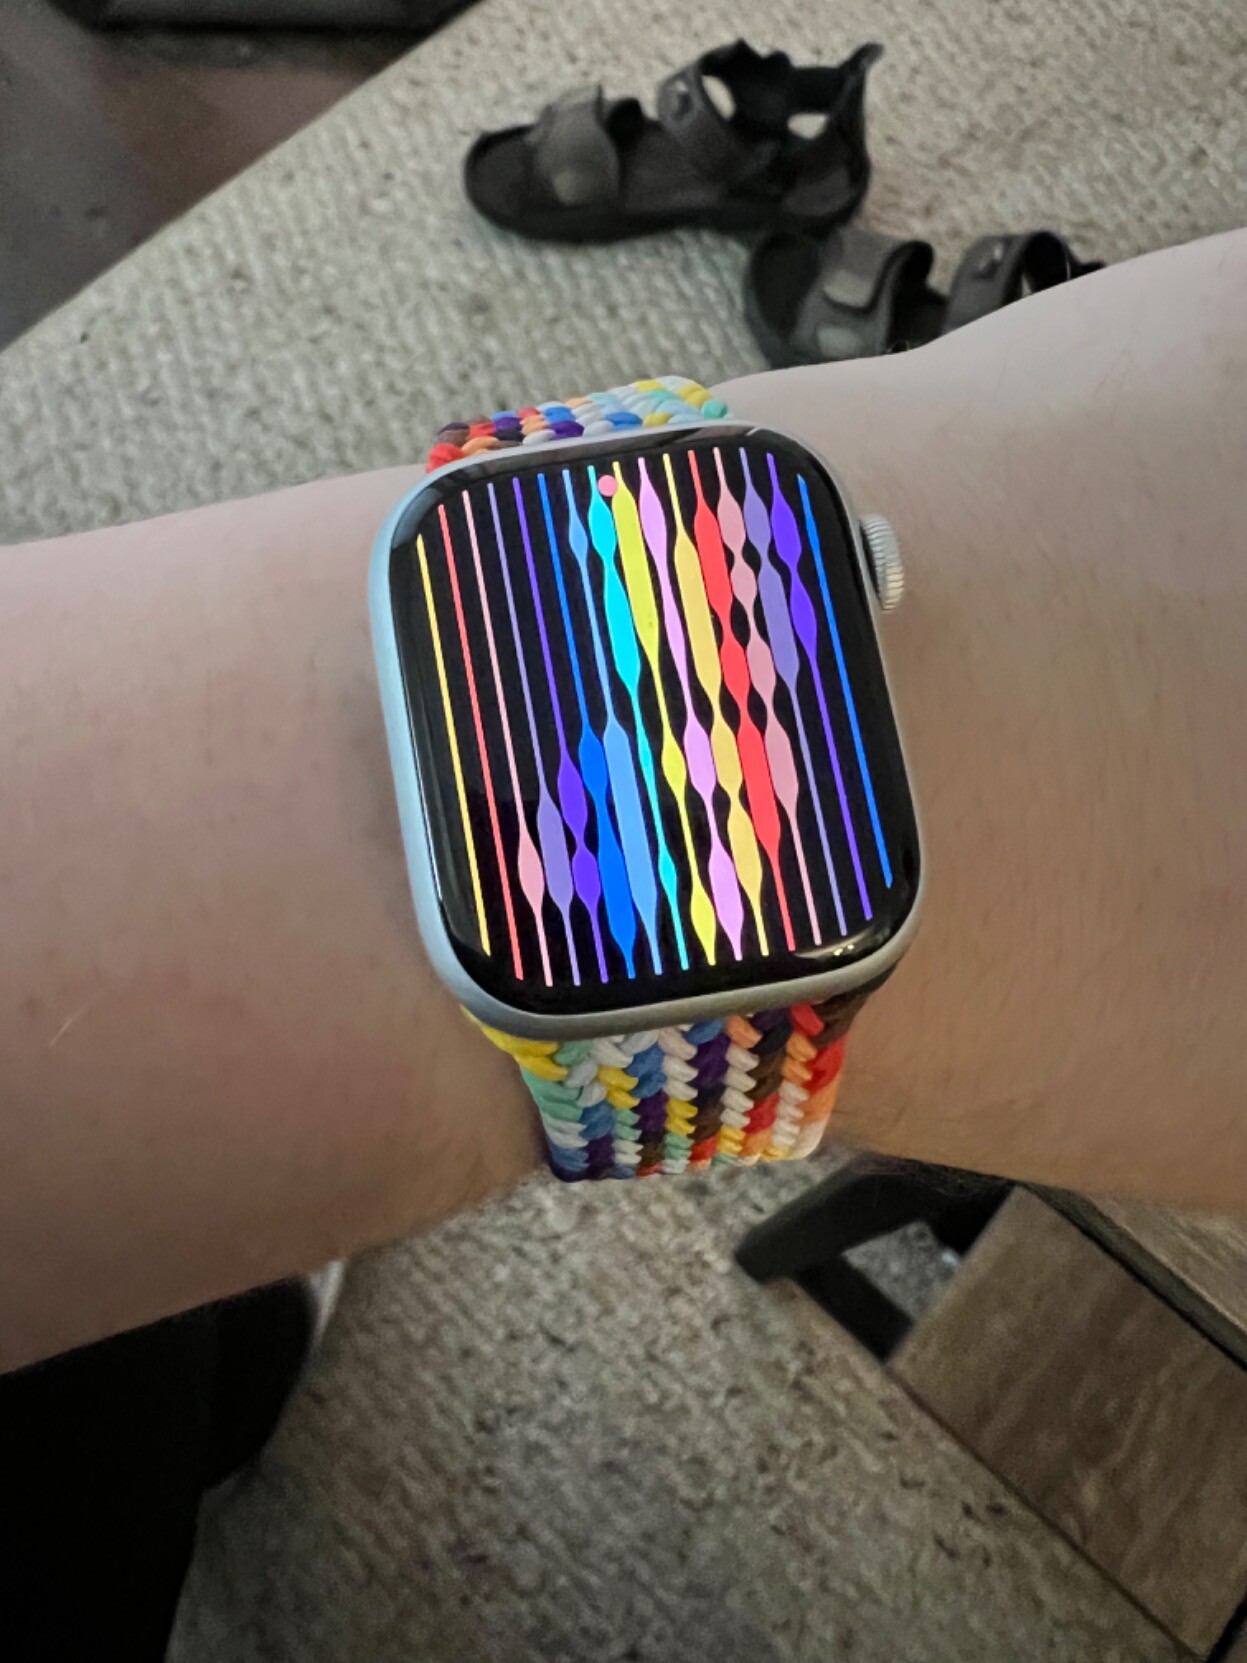 An Apple Watch series 8 with the pride edition band and the time saying "16:47"